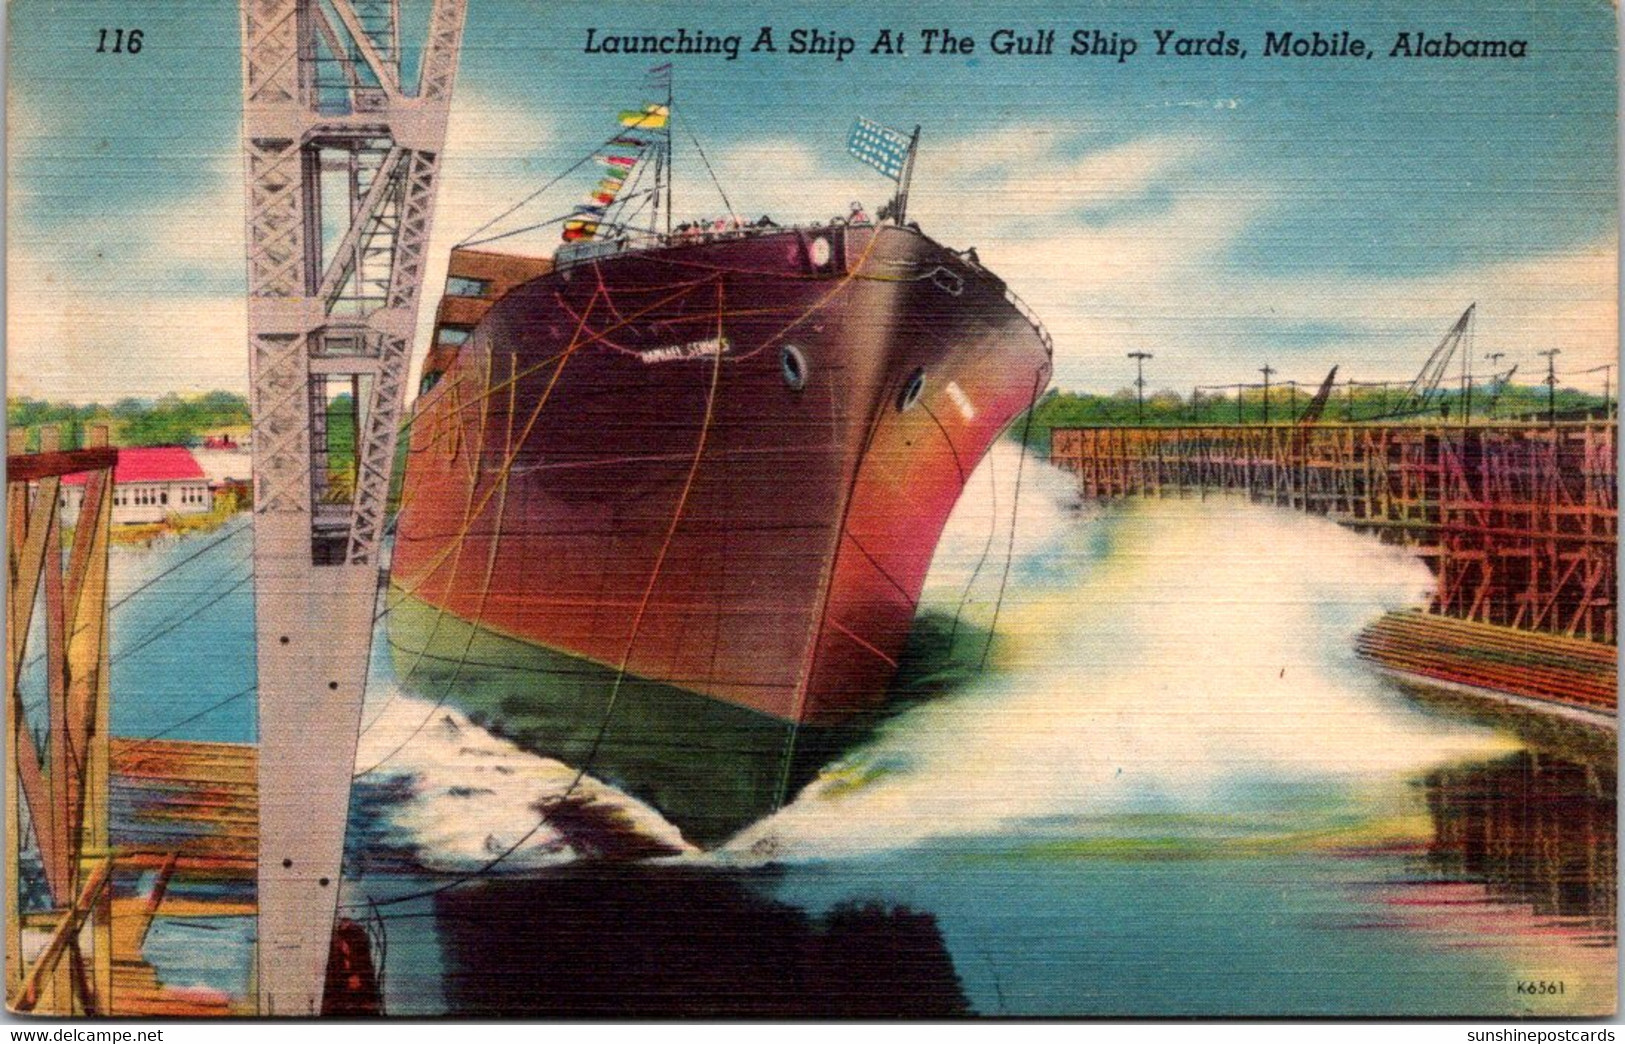 Alabama Mobile Launching A Ship At The Gulf Ship Yards - Mobile